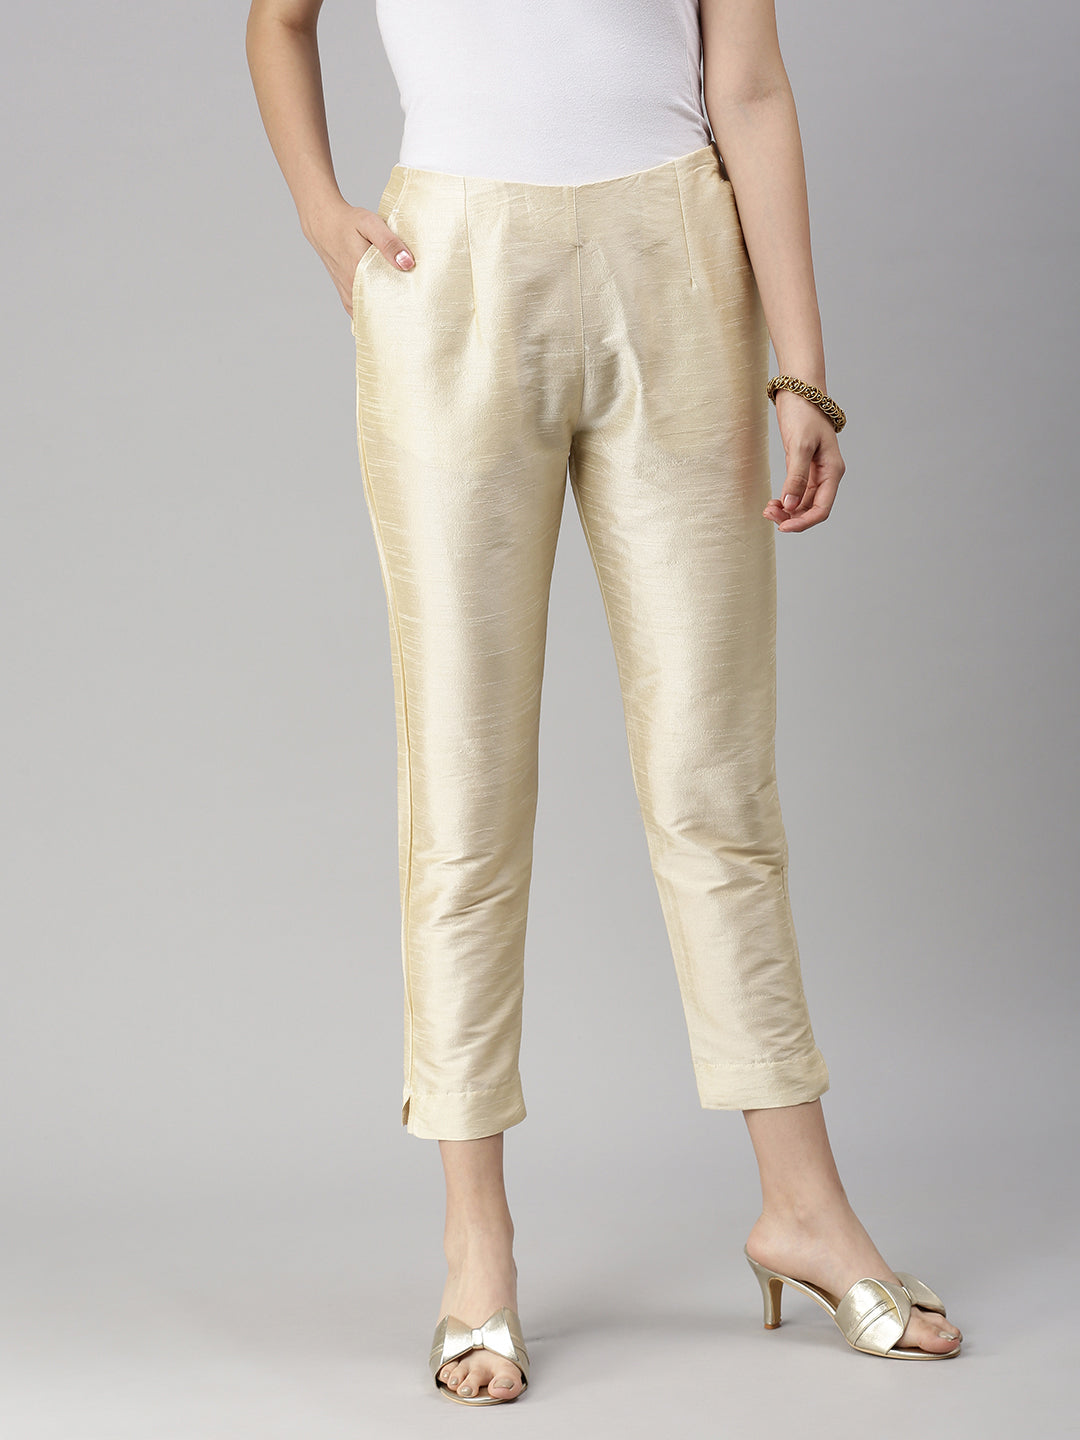 Off-White Cotton Pants for Ladies - Work Wear Cotton Trousers for Women |  CraftsandLooms – CraftsandLooms.com